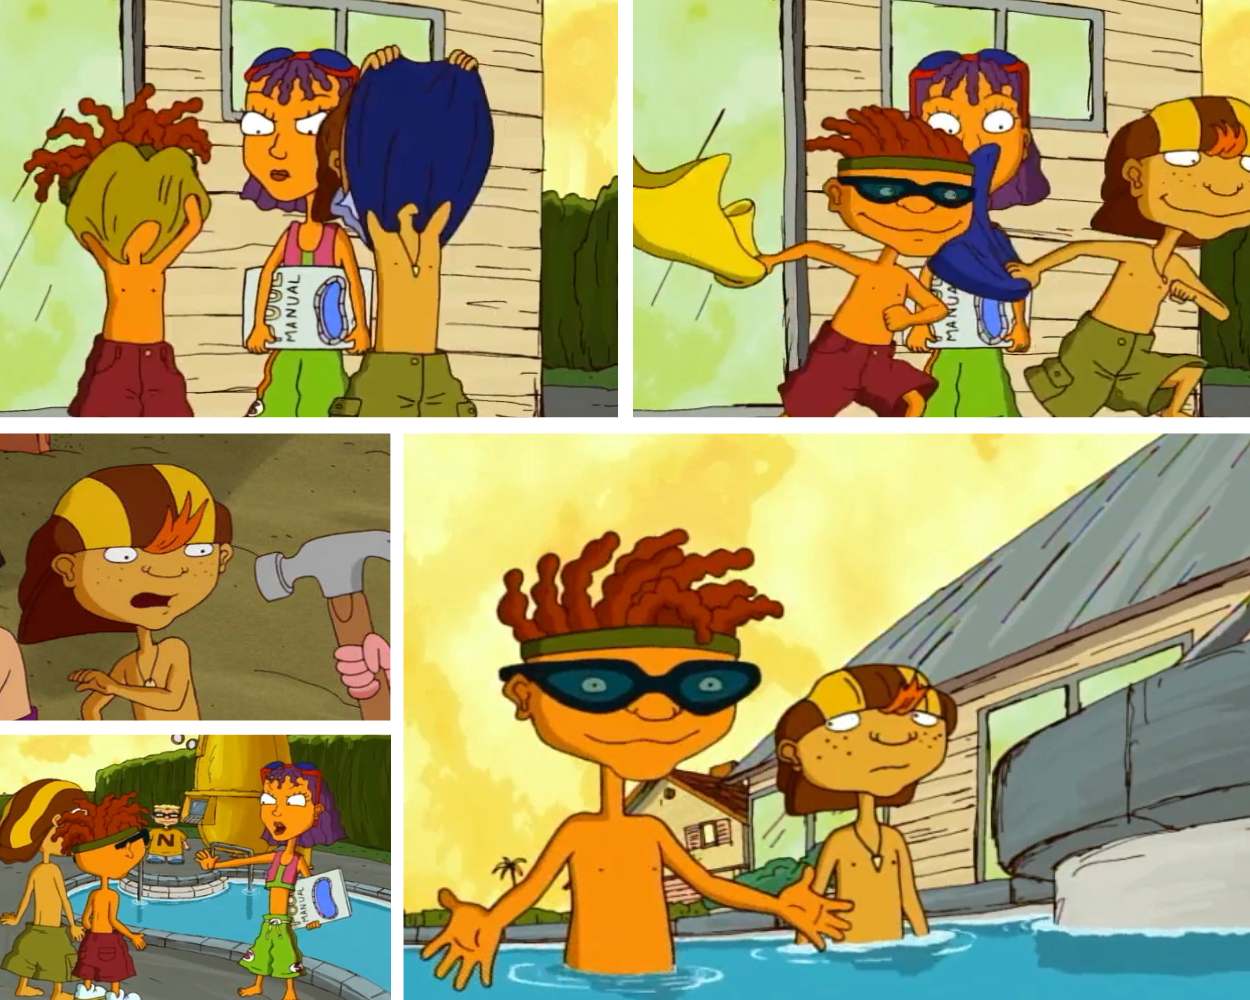 Twister Rodriguez from Rocket Power